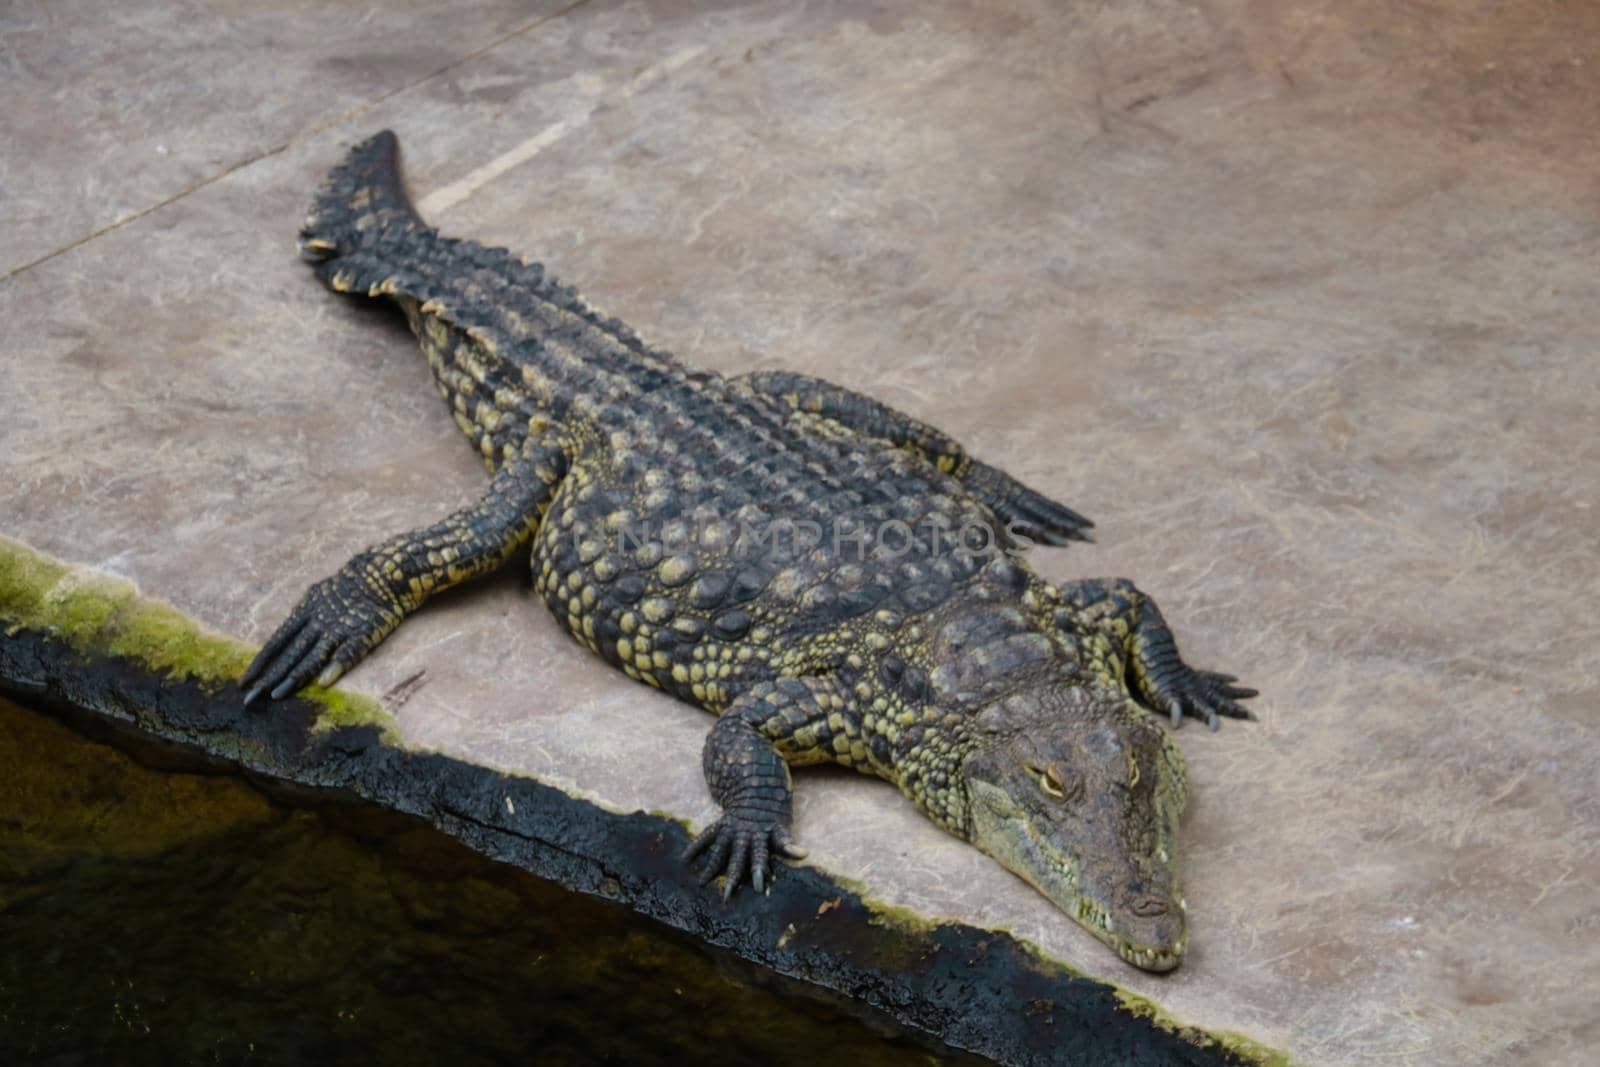 Top view of a large adult crocodile. Out of focus